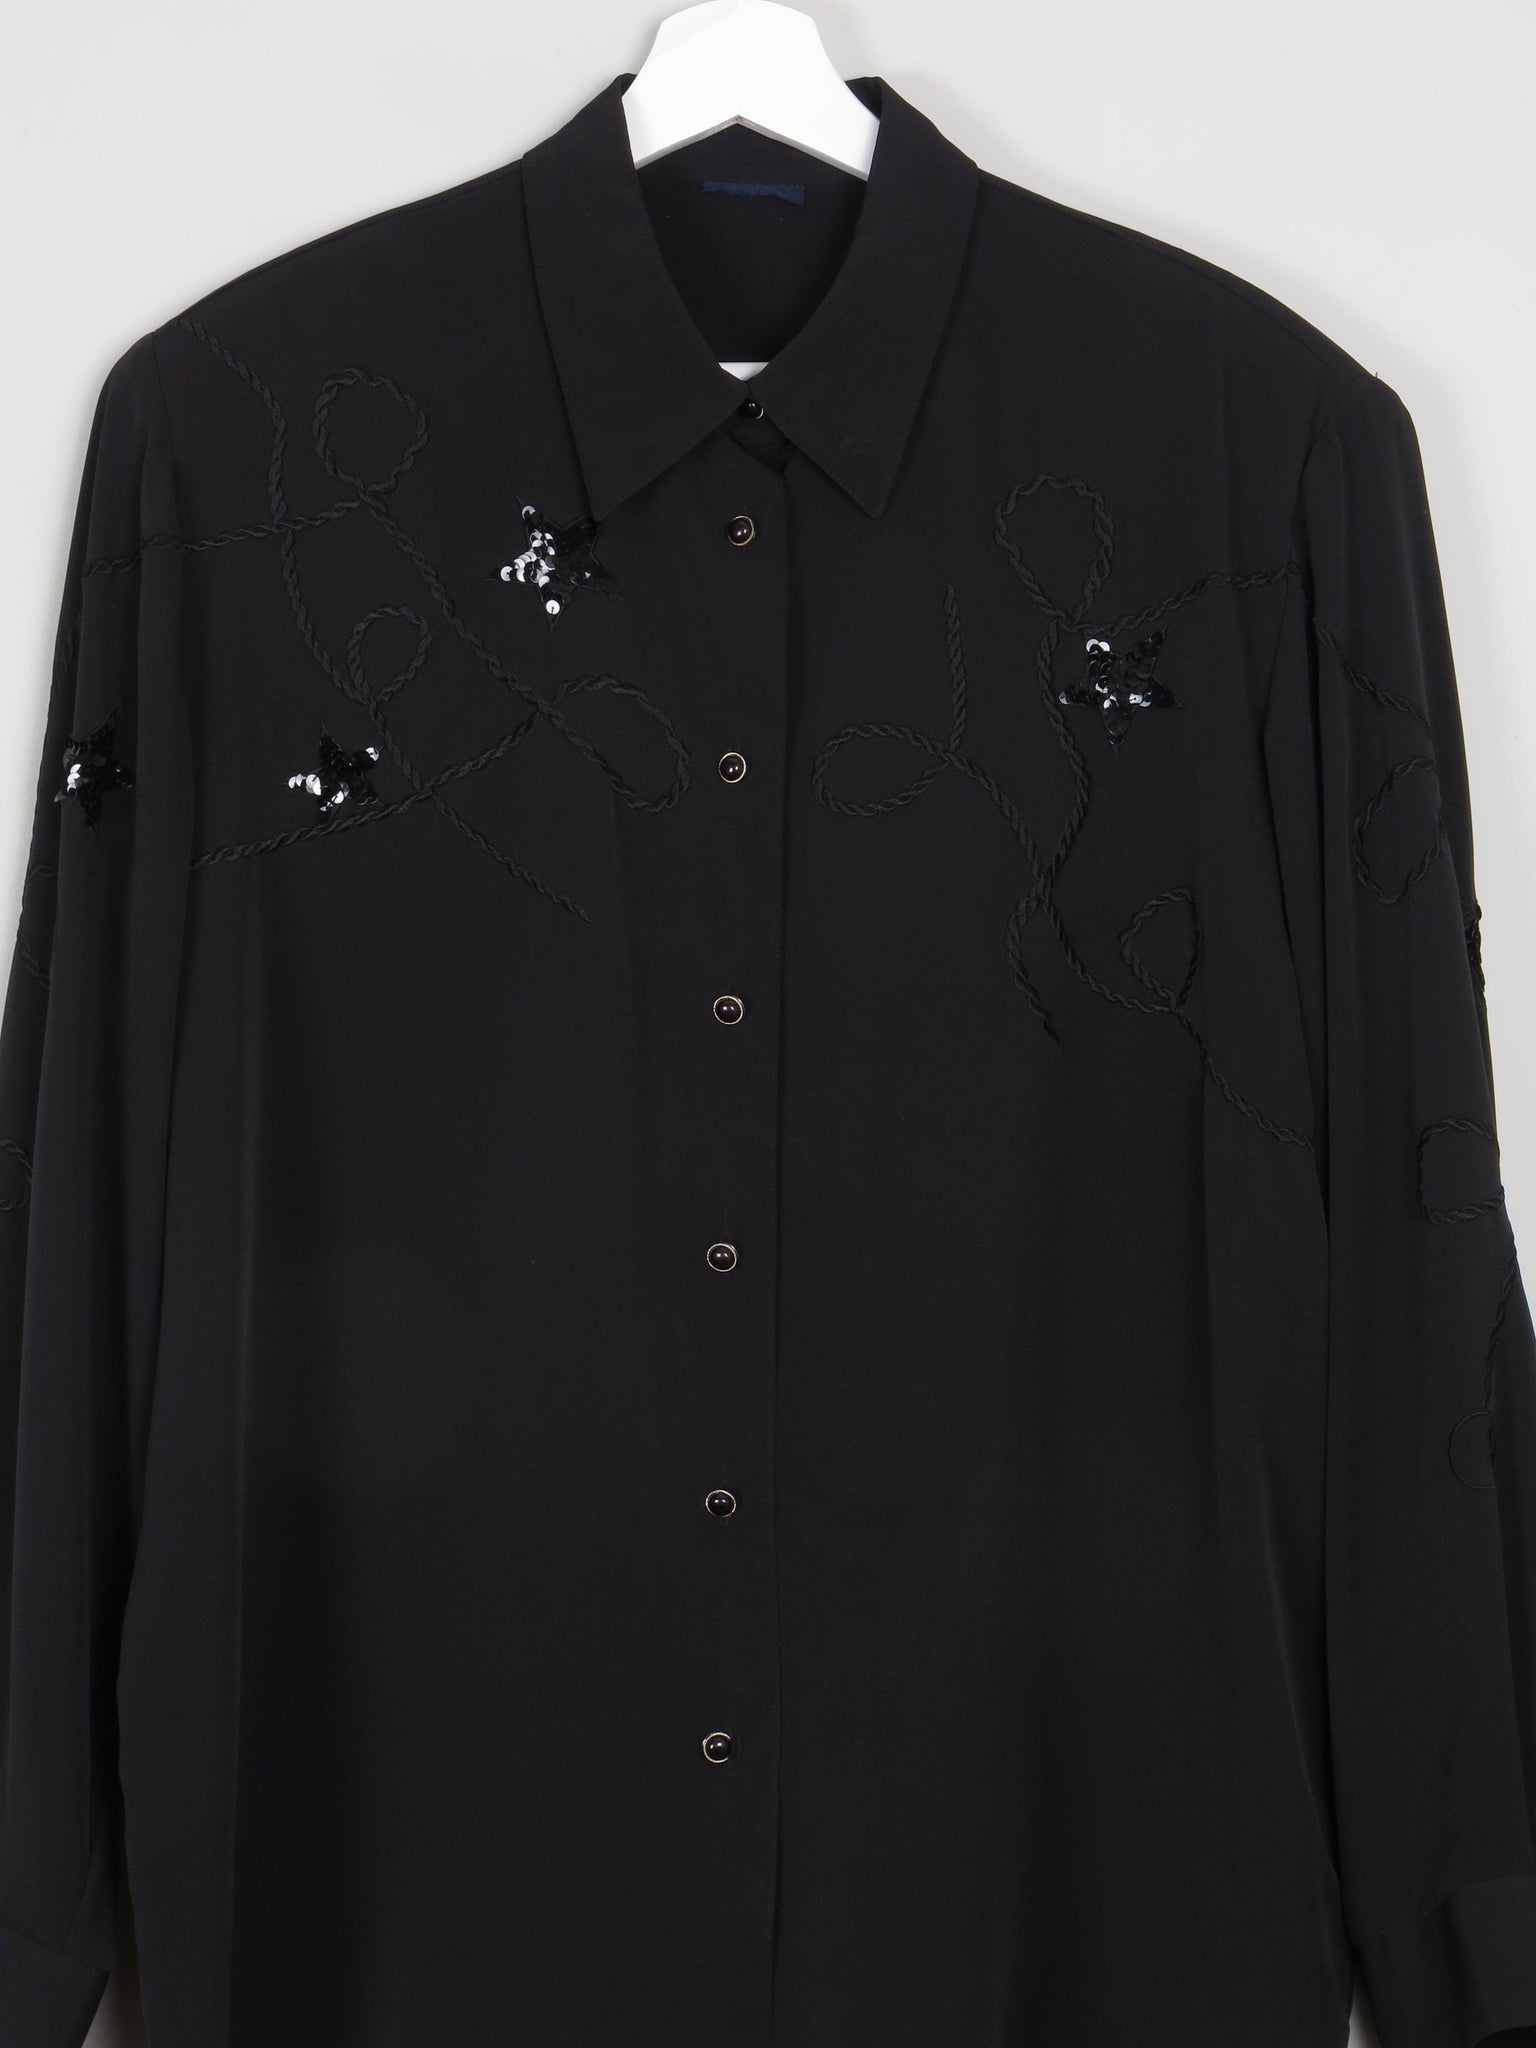 Vintage Black Sequin & Embroidered Vintage Blouse With Collar L/XL - The Harlequin